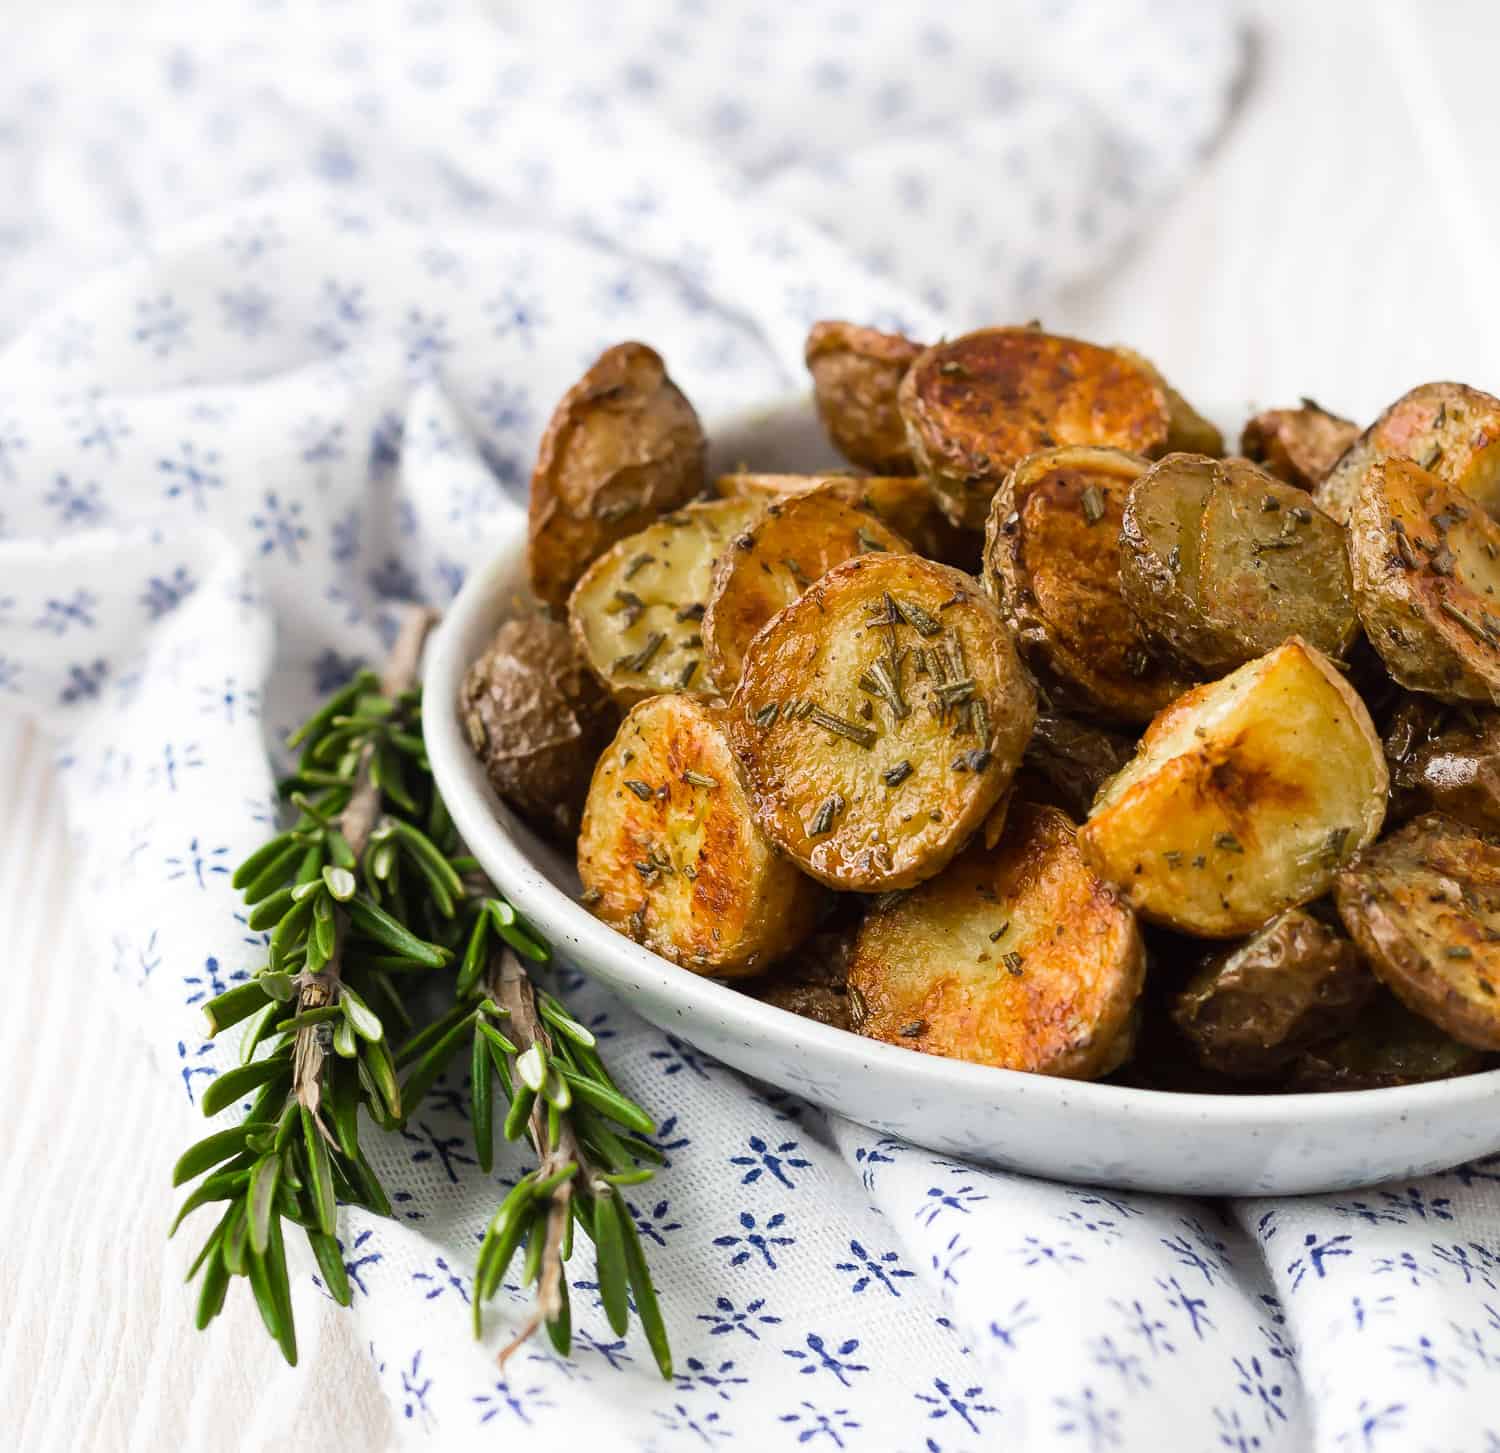 Roasted potatoes with rosemary in small bowl.